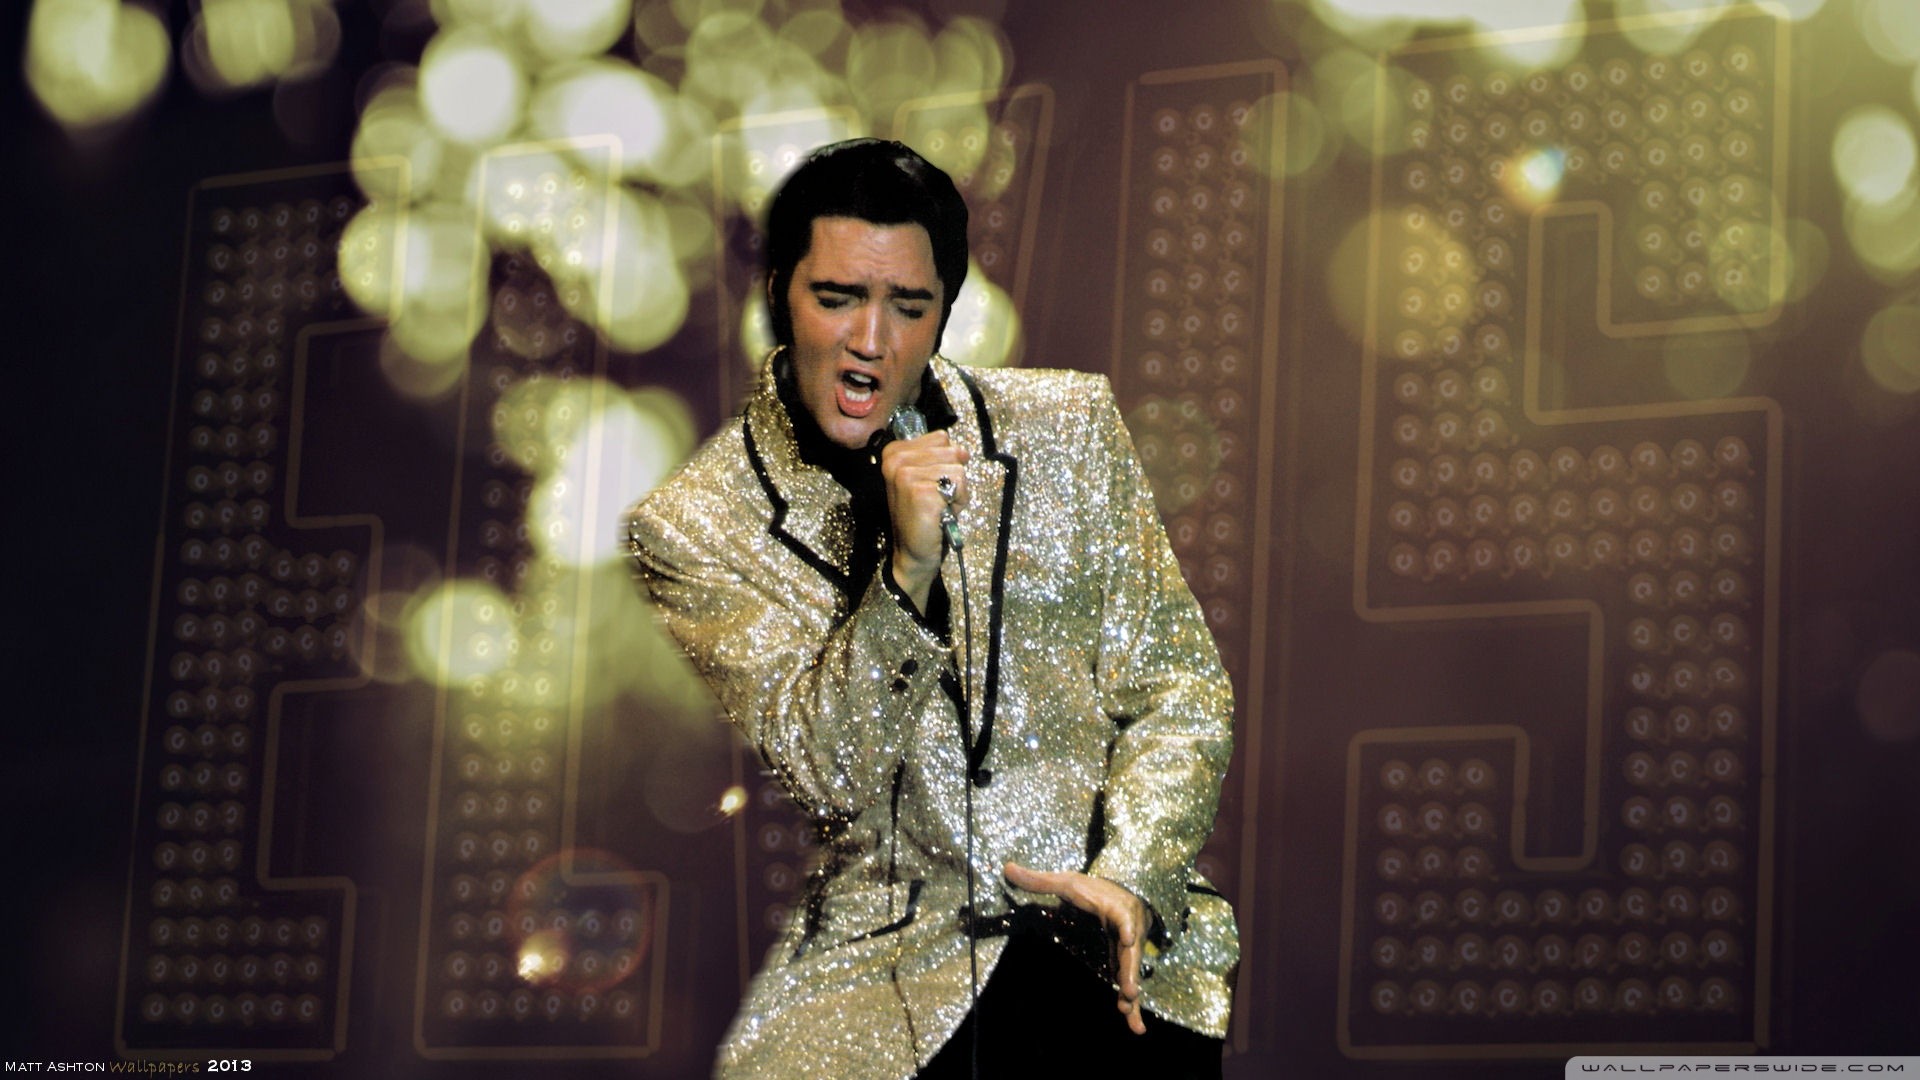 1920x1080 Free Elvis Presley wallpaper | Elvis Presley wallpapers 0 HTML code.  collection great pictures, pure High Definition HD. You can download .